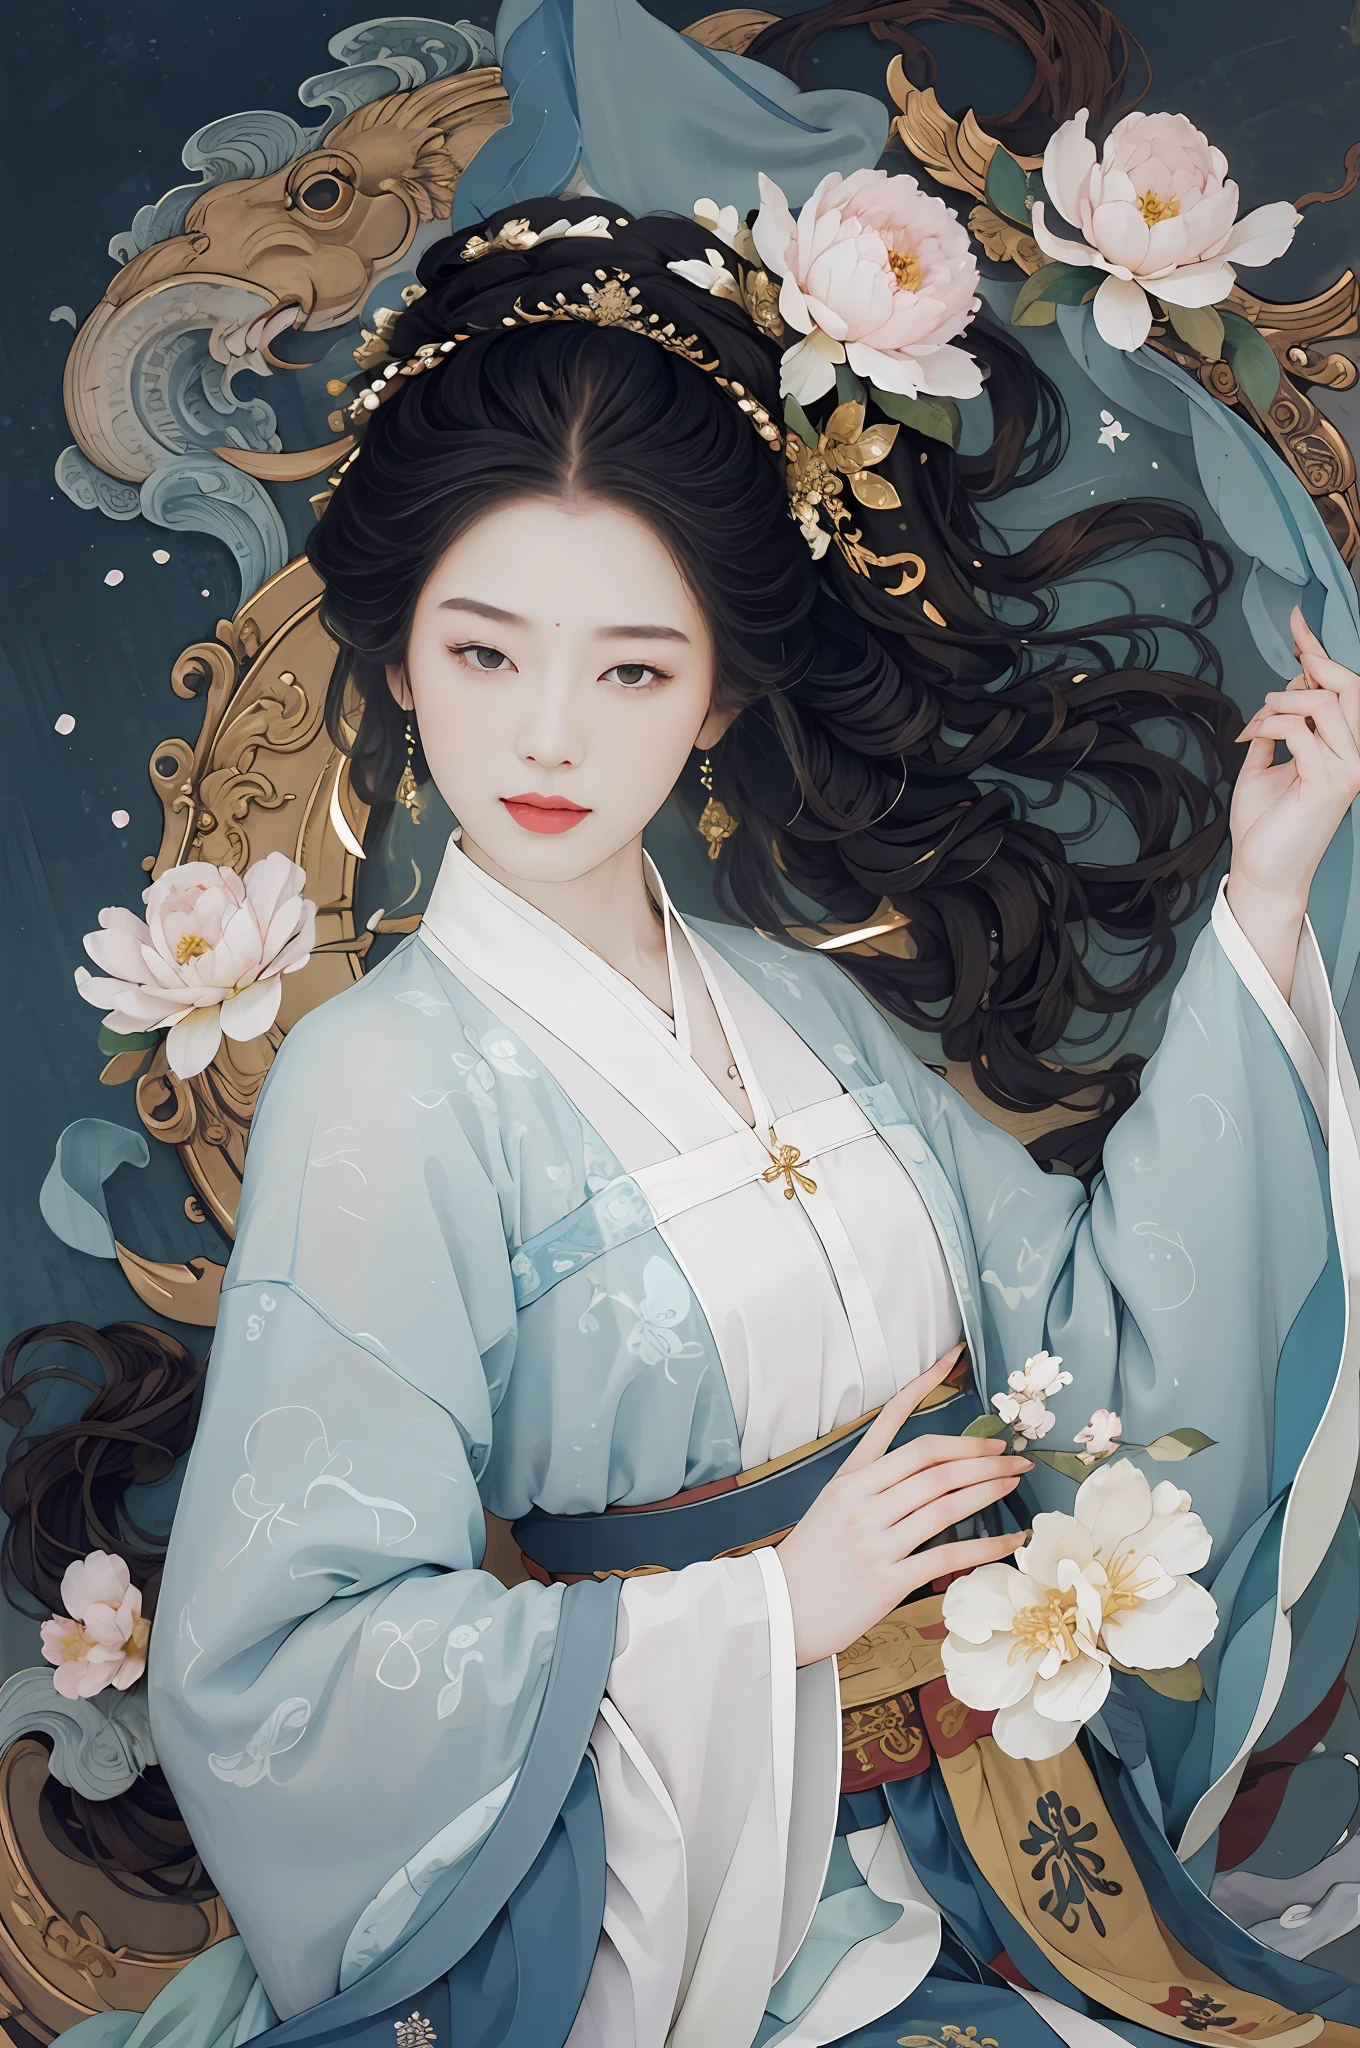 offcial art， Unity 8k Wallpaper， ultra - detailed， Beautiful and beautiful， tmasterpiece， best qualtiy， （realisticlying：1.4）， （dynamic angle：1.4）， ellegance， vivd colour， romanticism lain， Zhong Fenghua， 1girll， The lips are slightly open， （Flowers twinkle：1.5）， （solo：1.5）， （Look to the lens：1.3）， Umbellate， （See through Hanfu：1.3）， （small flower：1.5）， （plaster：1.3）， （blossom flower：1.3）， Glowing skin， （Floating colorful flashes：1）The most beautiful forms of chaos， （Pale color background：1.5）， （Traditional Chinese landscape painting background：1.3），  full bodyesbian，Normal fingers，Only two hands，